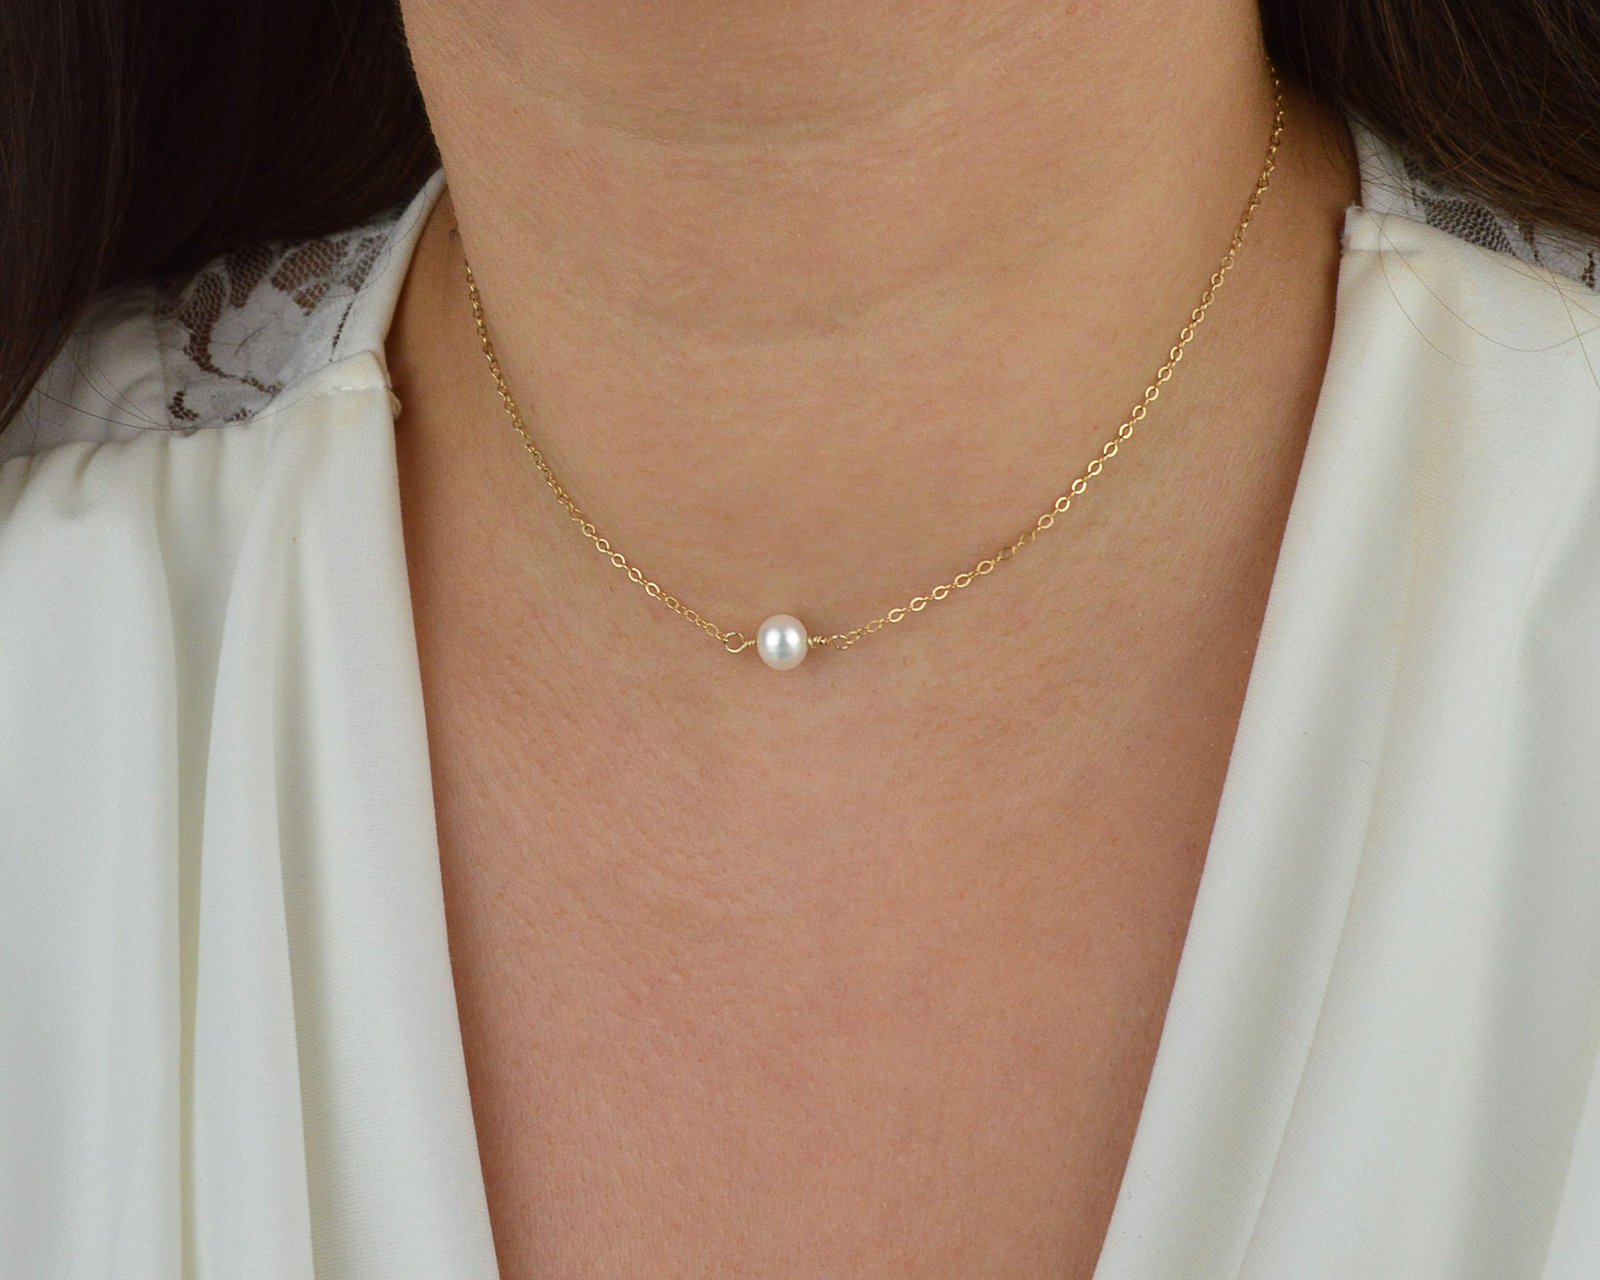  white-pearl-necklace